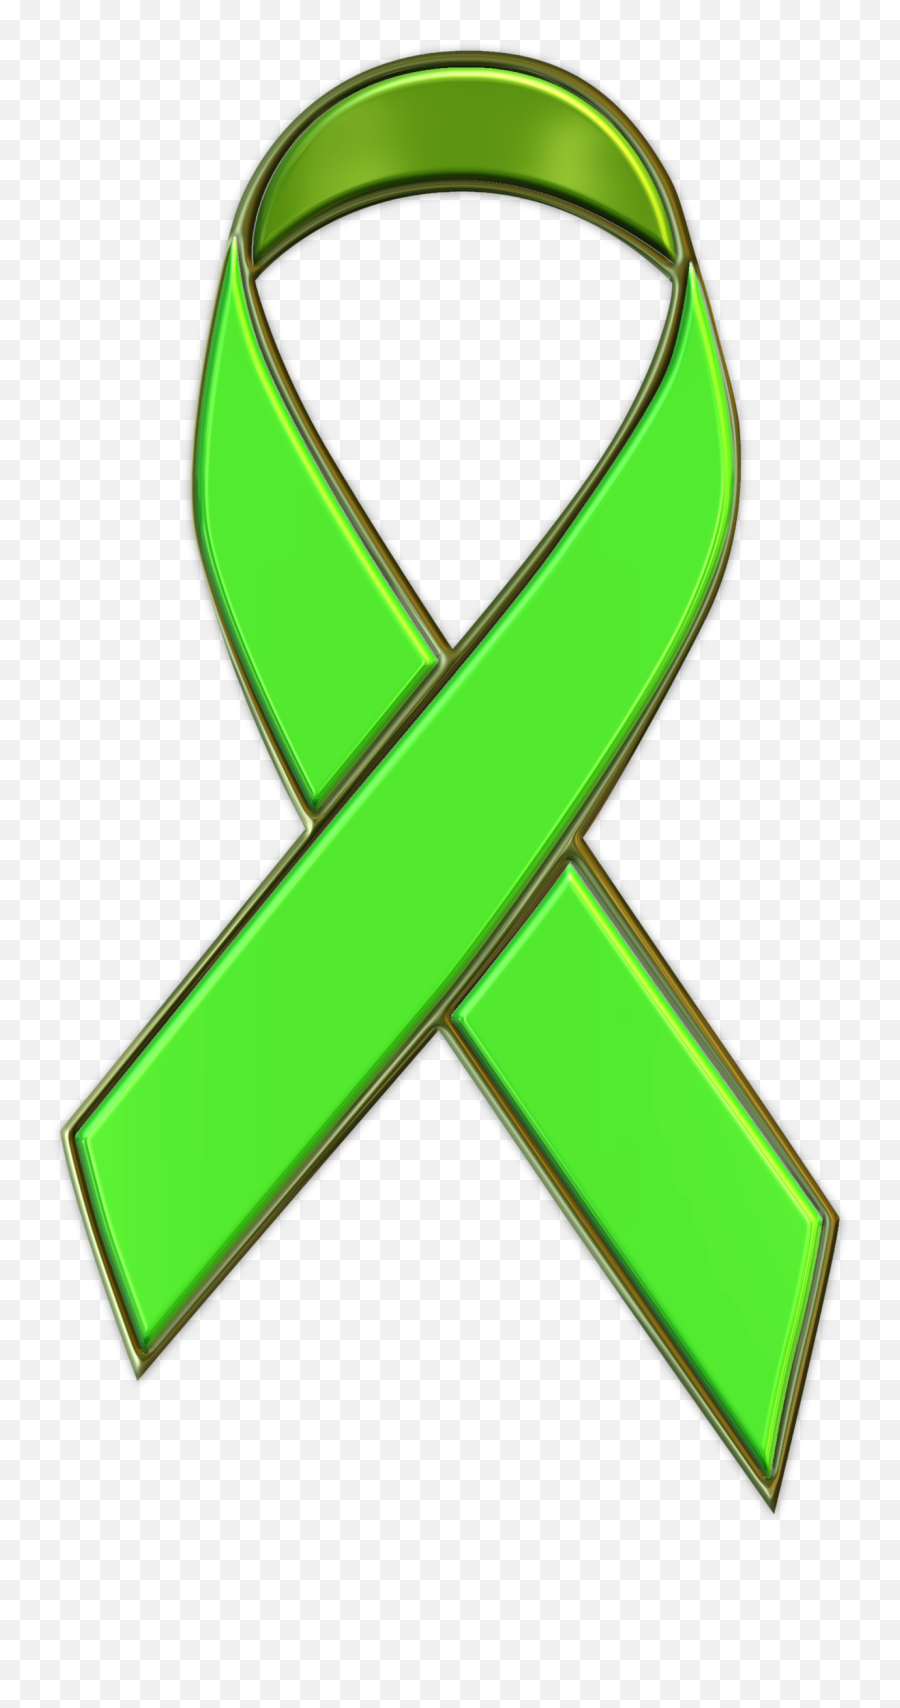 Lime Green Cancer Ribbon - Clipart Best Green Ribbon Emoji,Cancer Ribbon Clipart